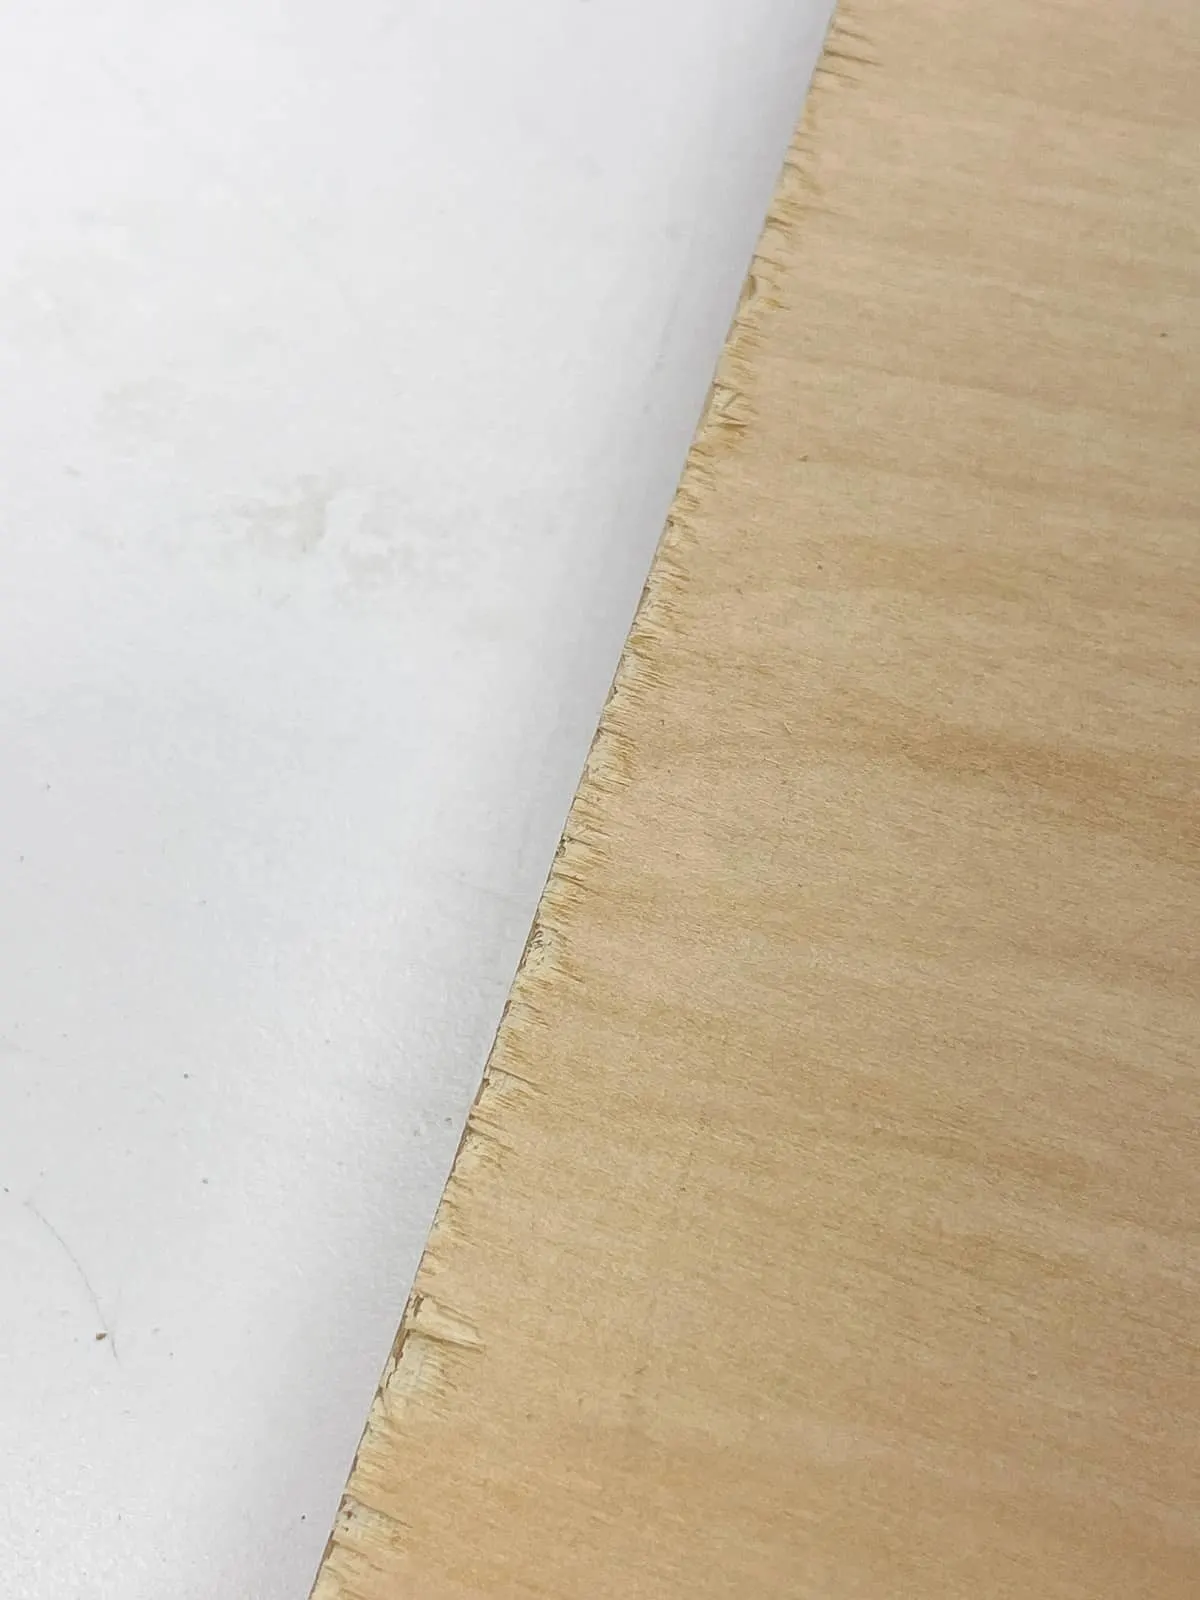 tear out along edge of plywood board from a jigsaw blade